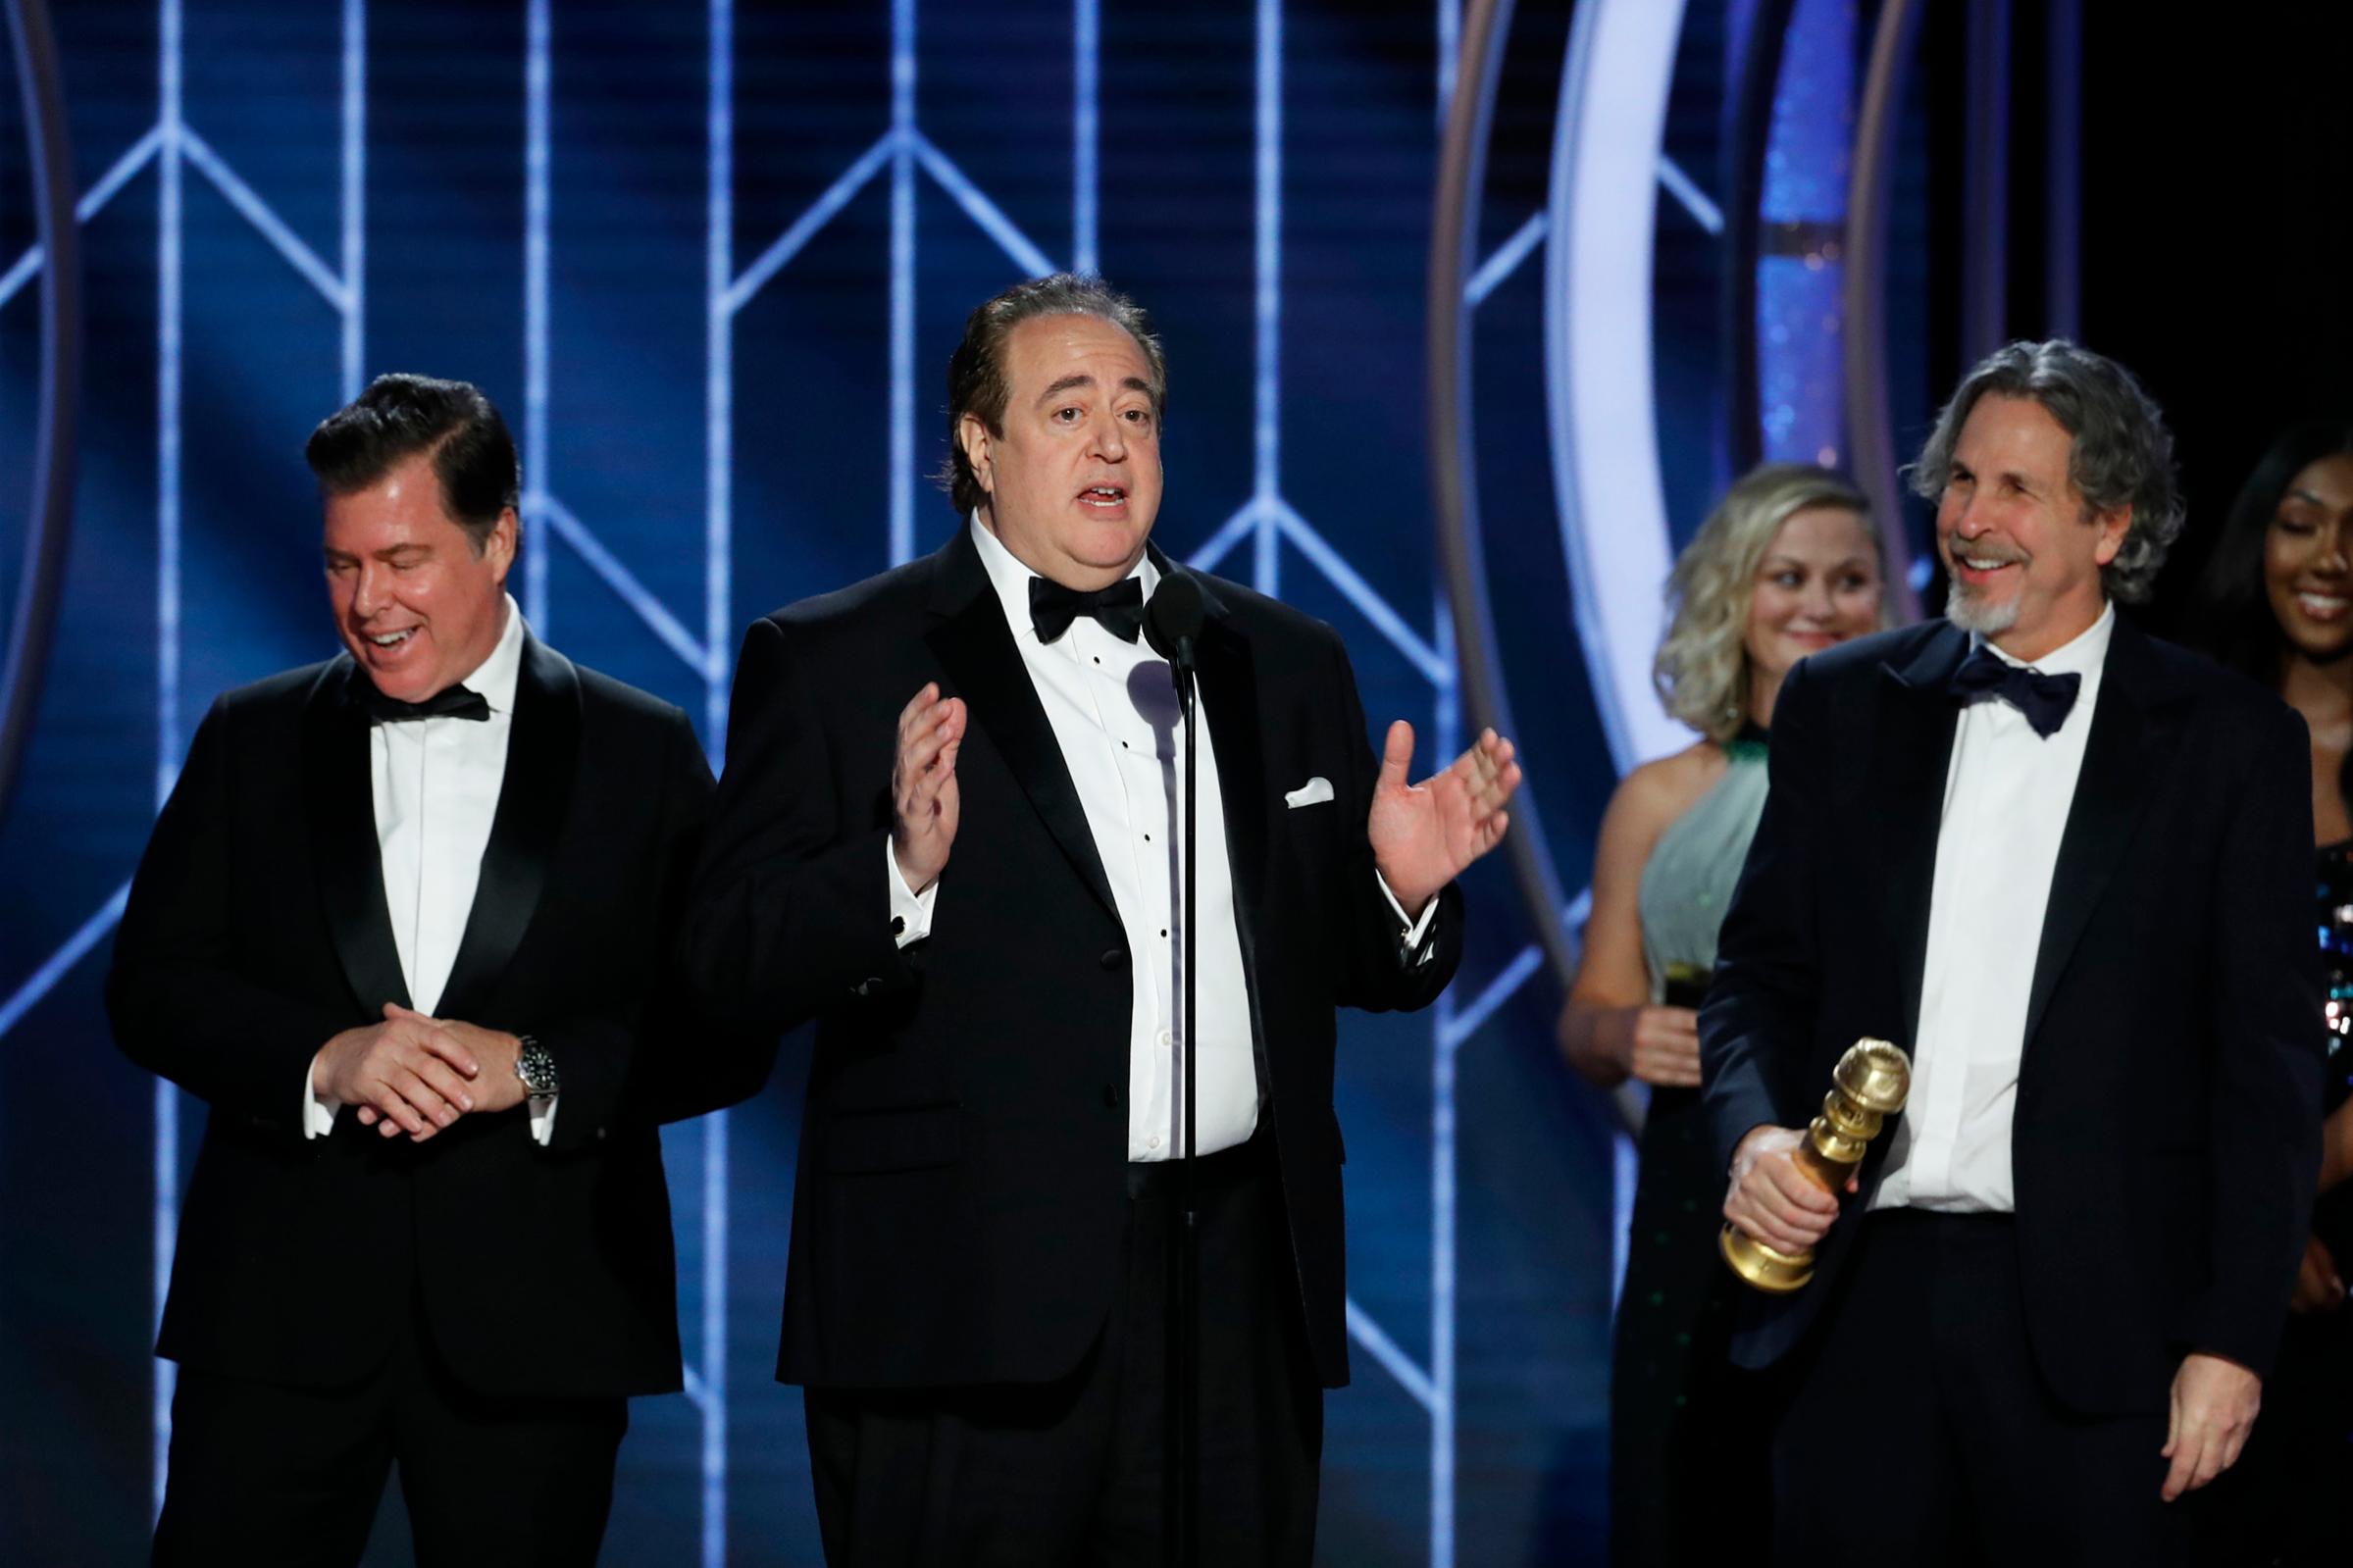 Brian Currie, Nick Vallelonga and Peter Farrelly of “Green Book” accept the Best Screenplay – Motion Picture award onstage during the 76th Annual Golden Globe Awards.